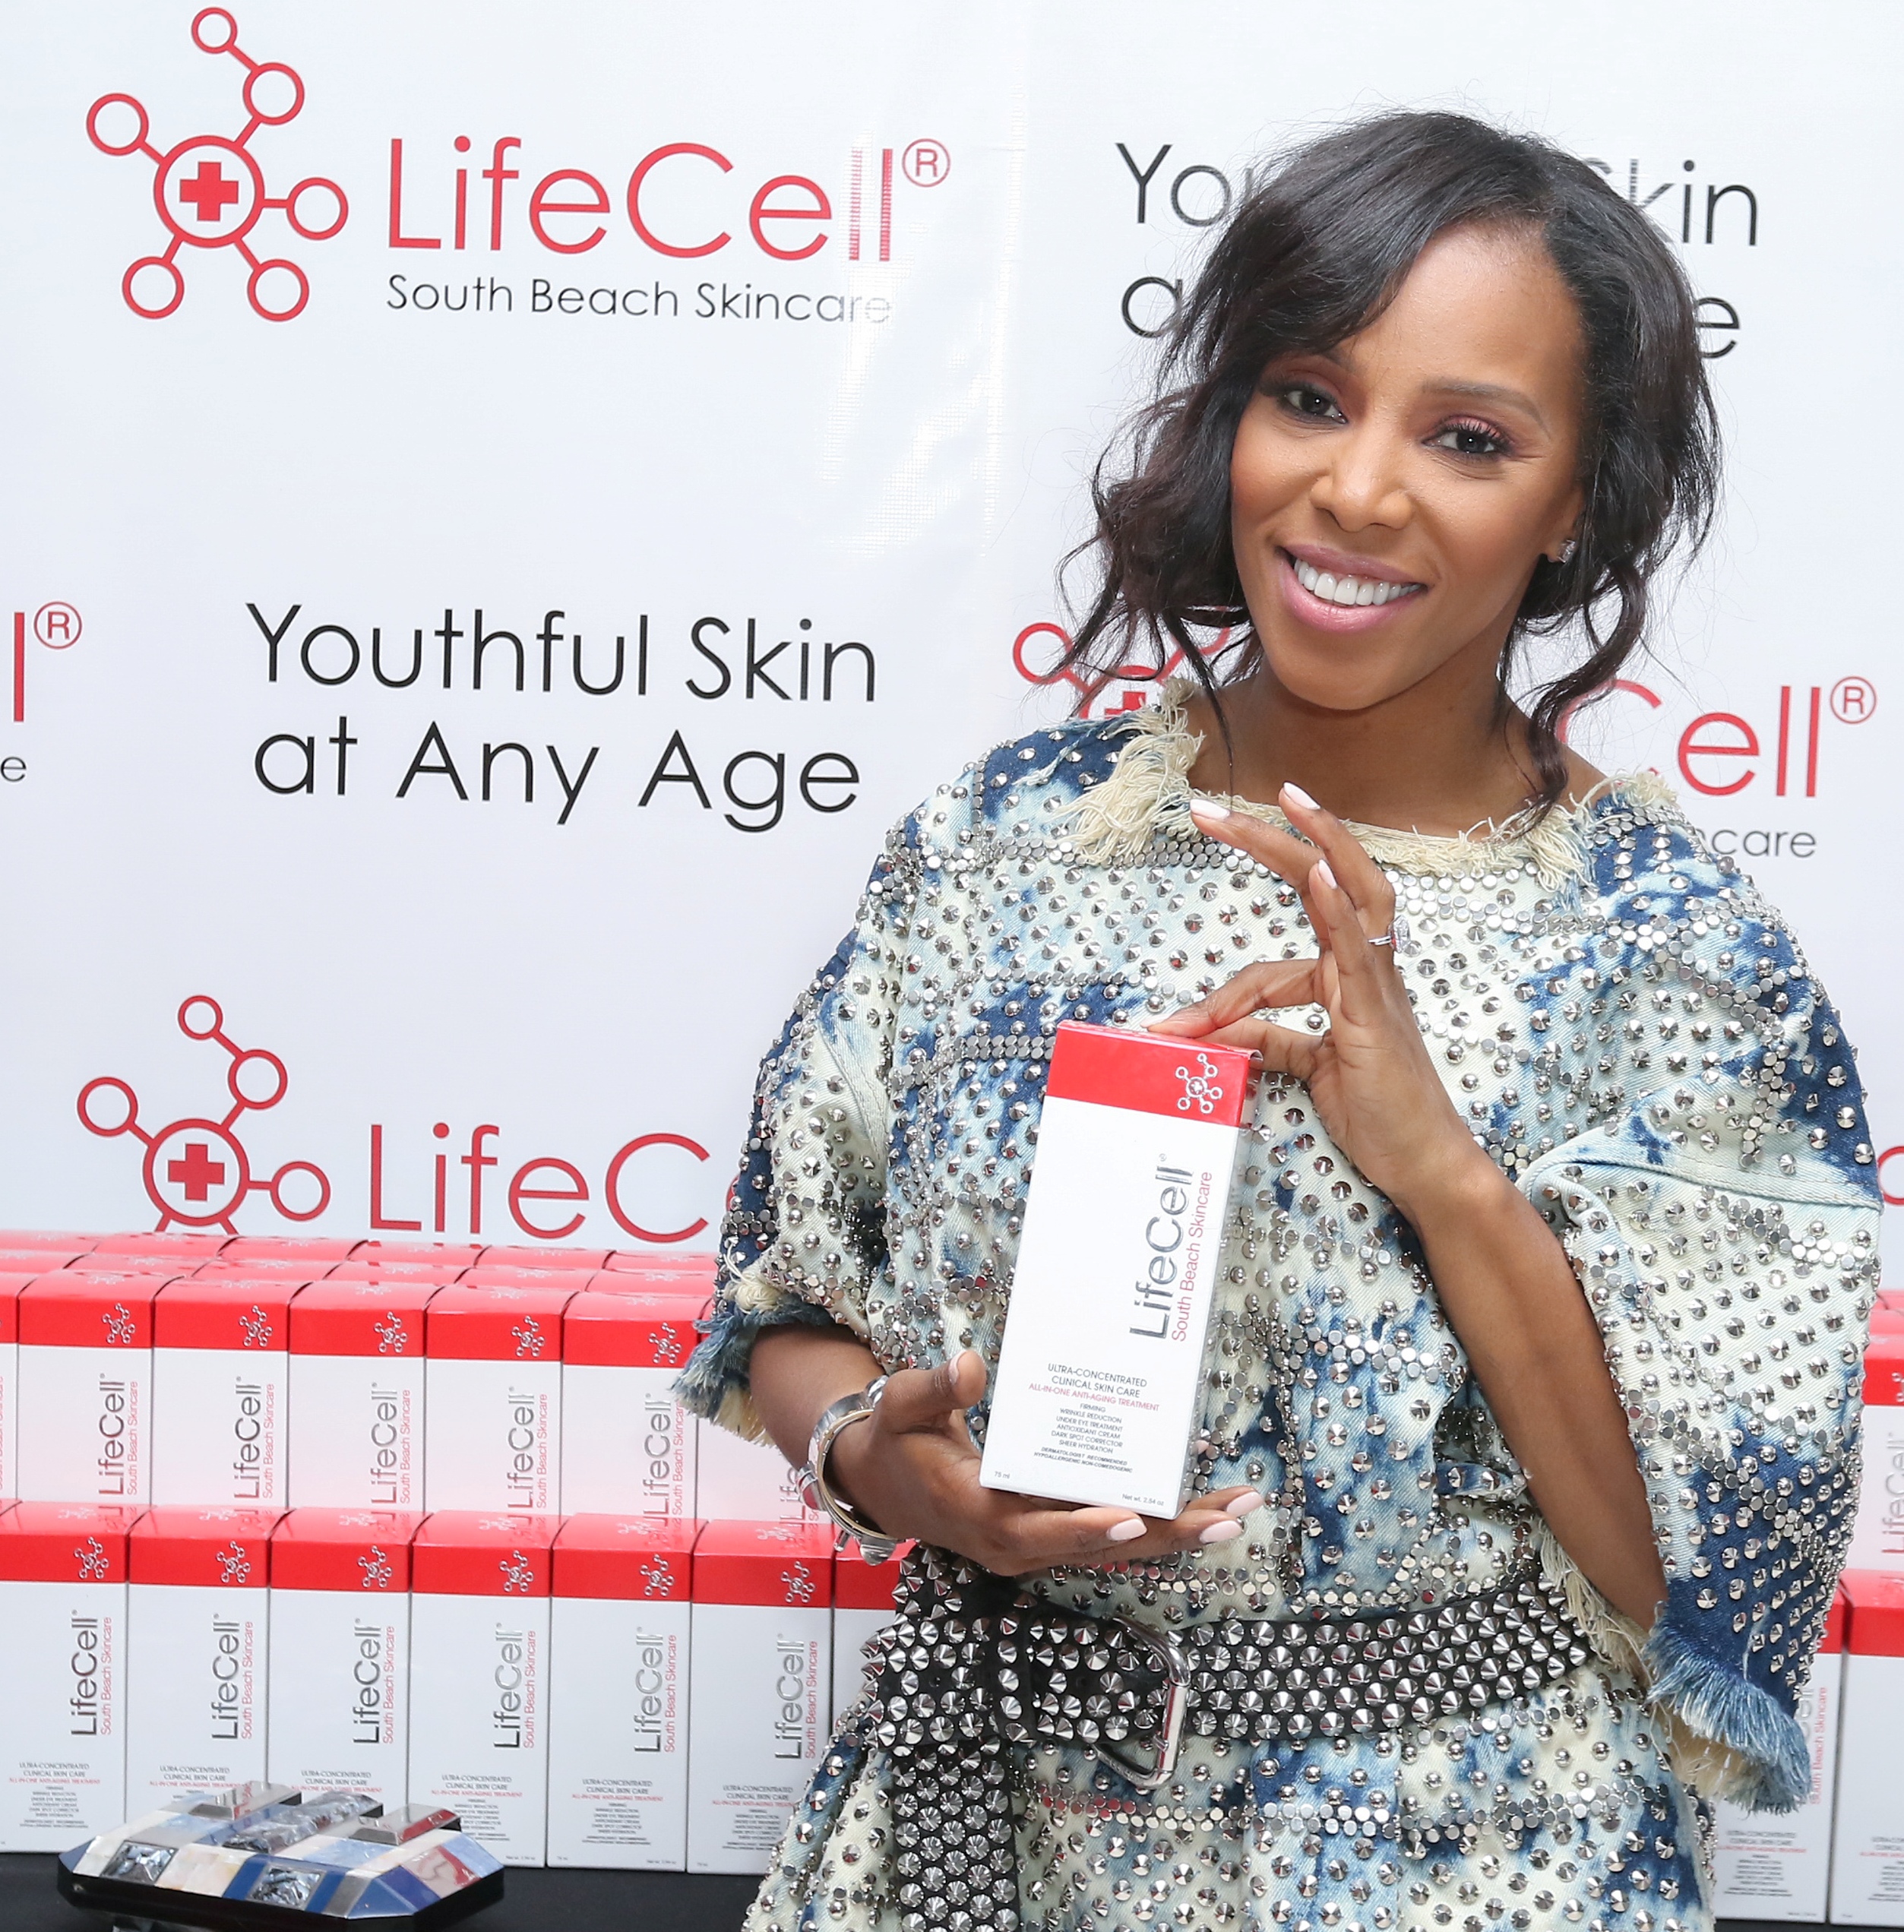 June Ambrose Visits the LifeCell Booth at GBK and Pilot Pen's Gift Lounge